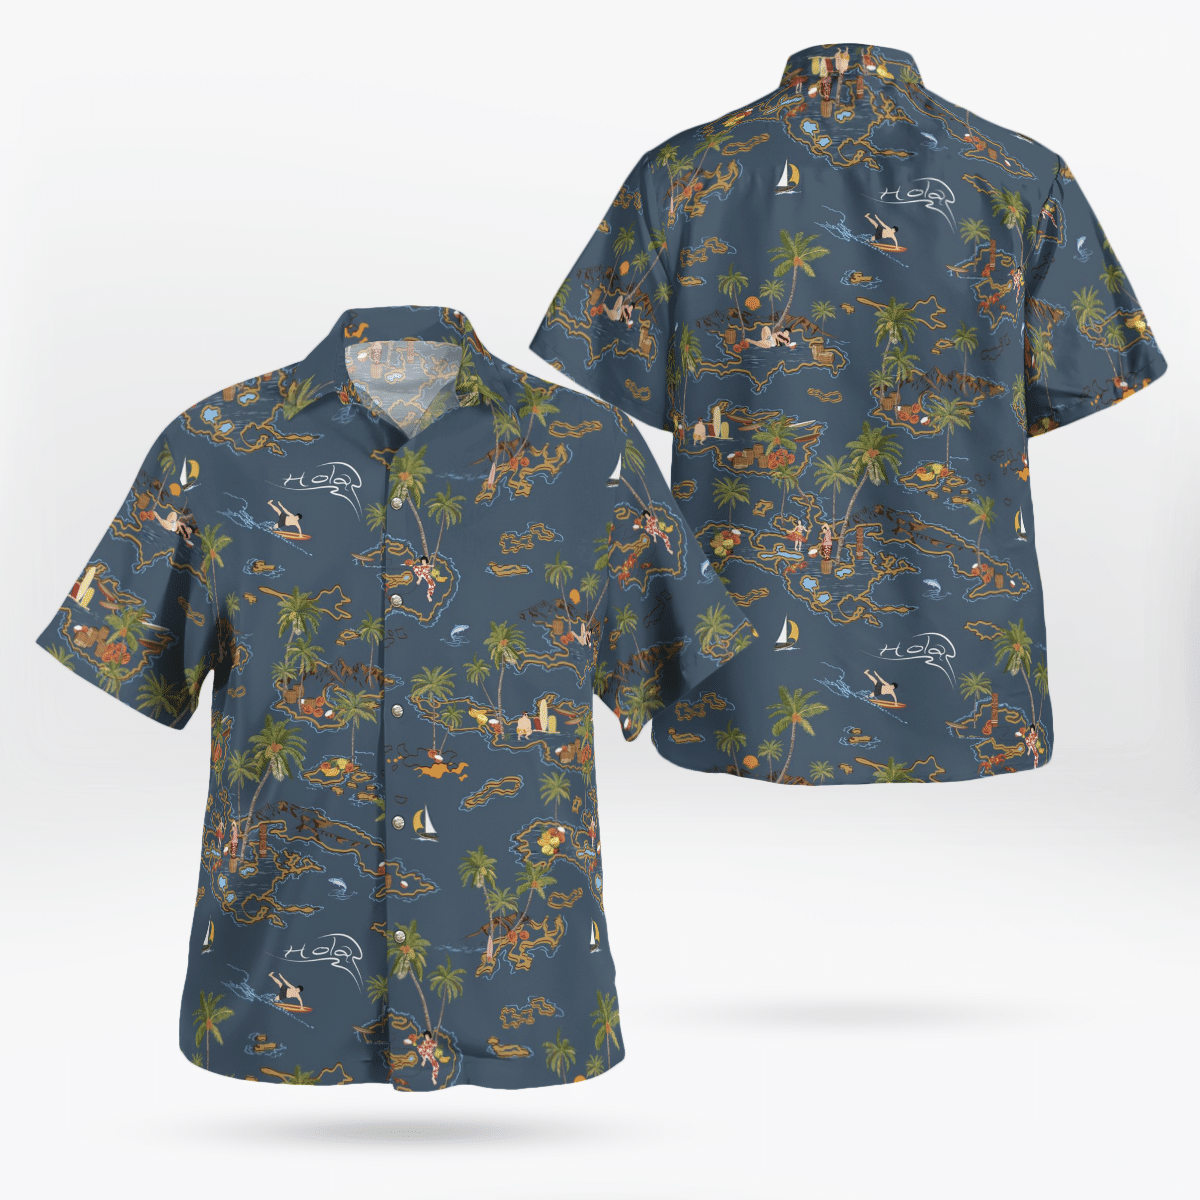 If you want to be noticed, wear These Trendy Hawaiian Shirt 99